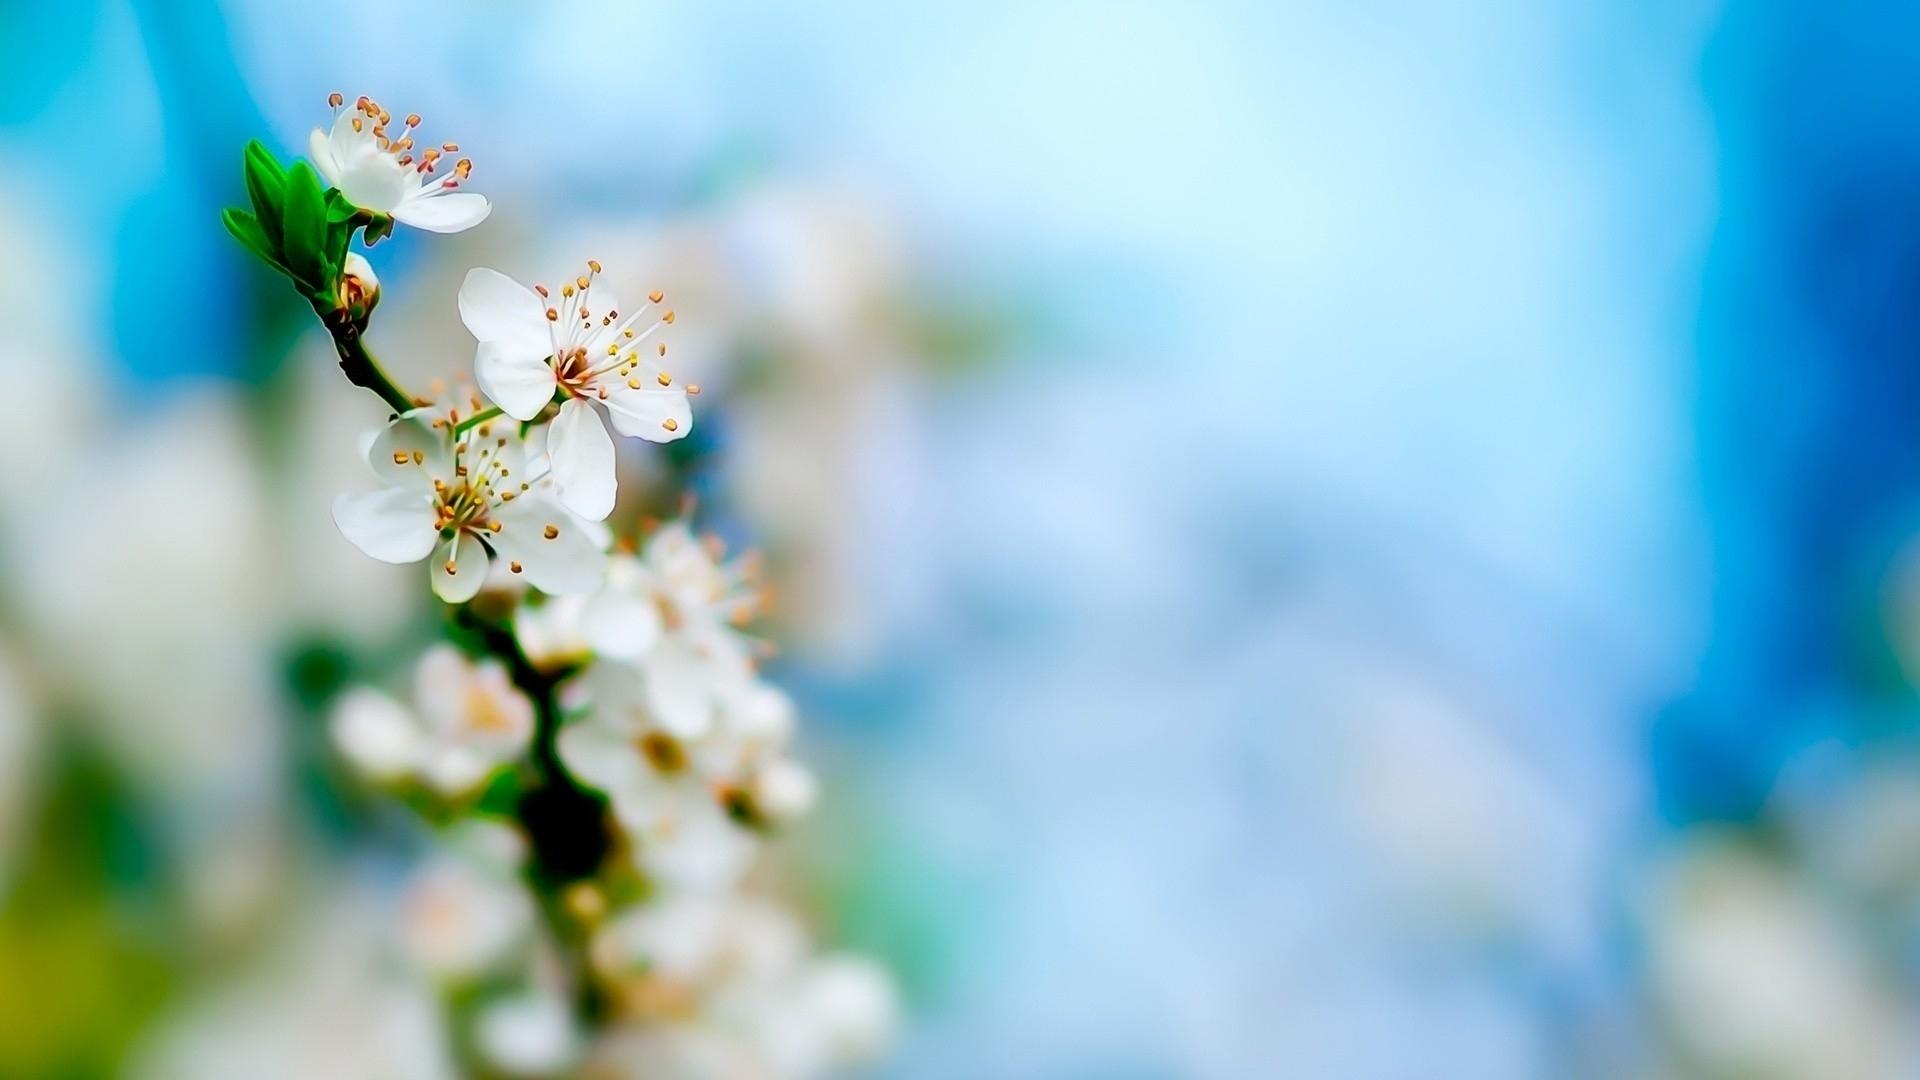 Beautiful White Flowers Wallpaper for PC. Full HD Picture